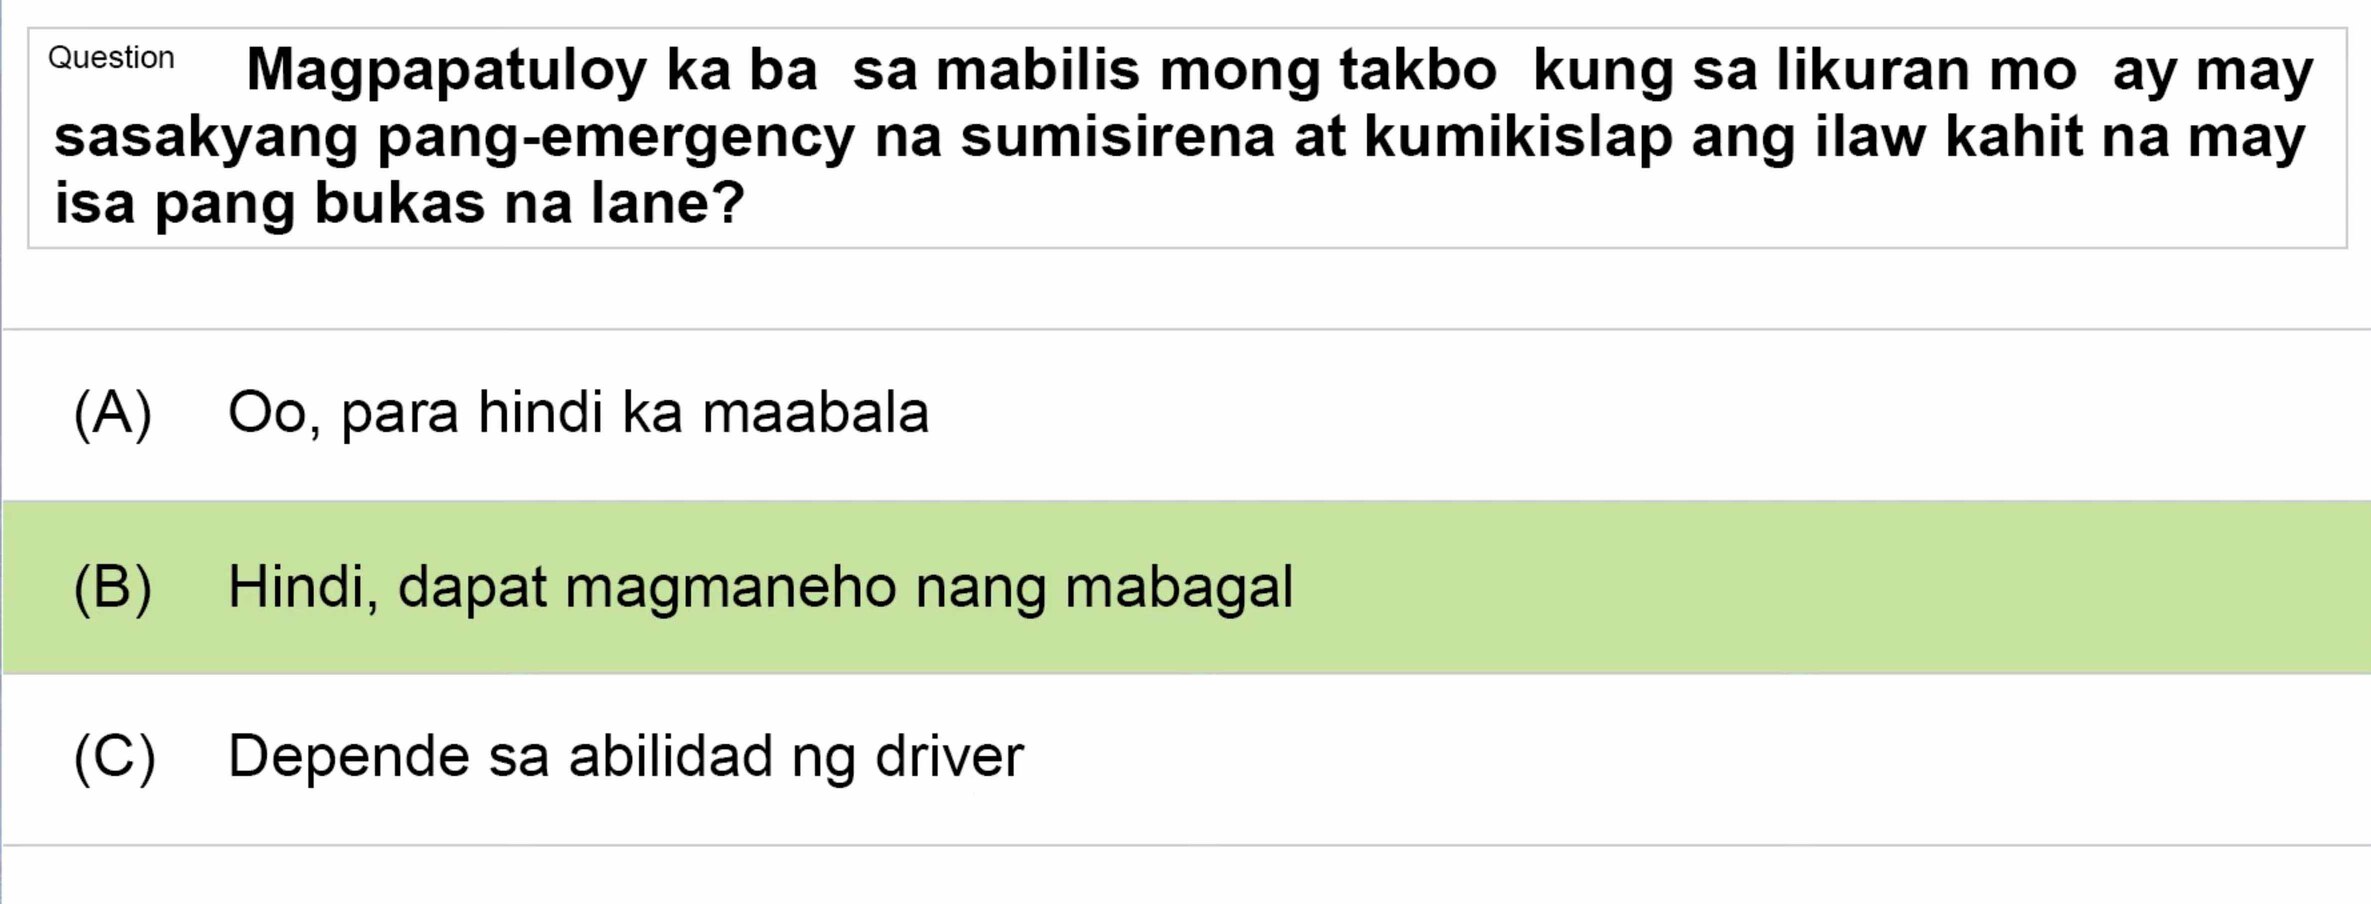 LTO Tagalog non professional exam reviewer light vehicle 3 (4)